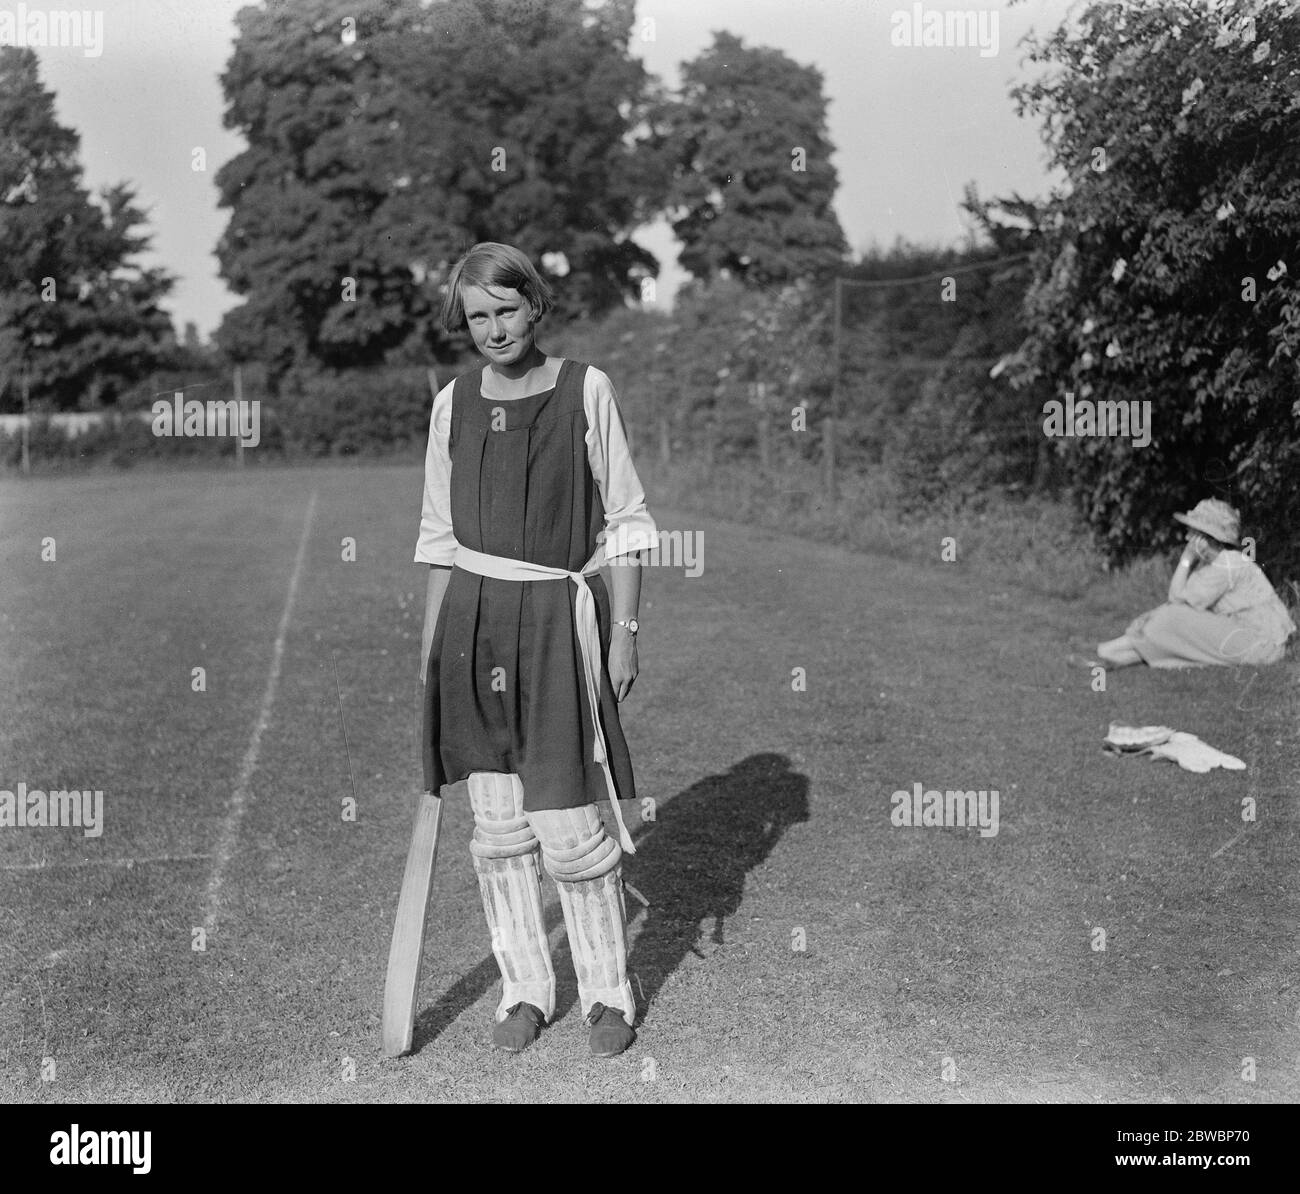 First pictures of Varsity Women Cricketers St Hughes College and Summerville College have just contested the final of the ladies inter collegiate cricket tournament at Oxford Miss M D D Monk , captain of St Hughes College team 13 June 1922 Stock Photo